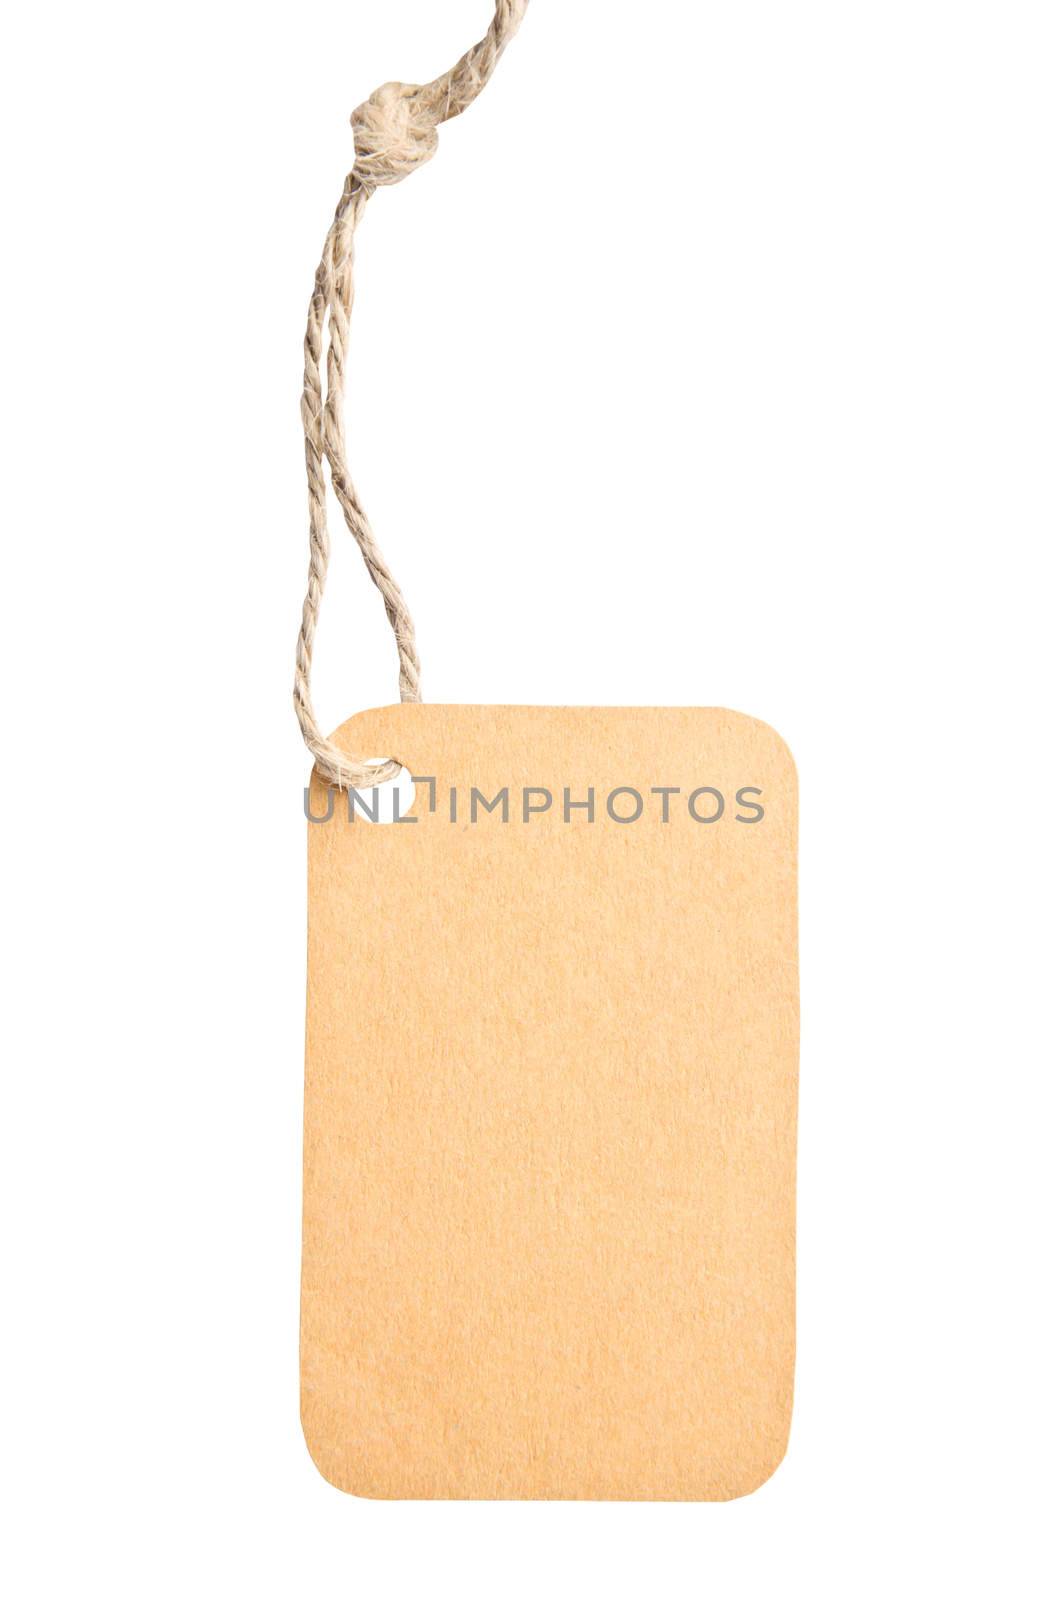 Blank tag tied with brown string isolated against a white backgr by Gamjai